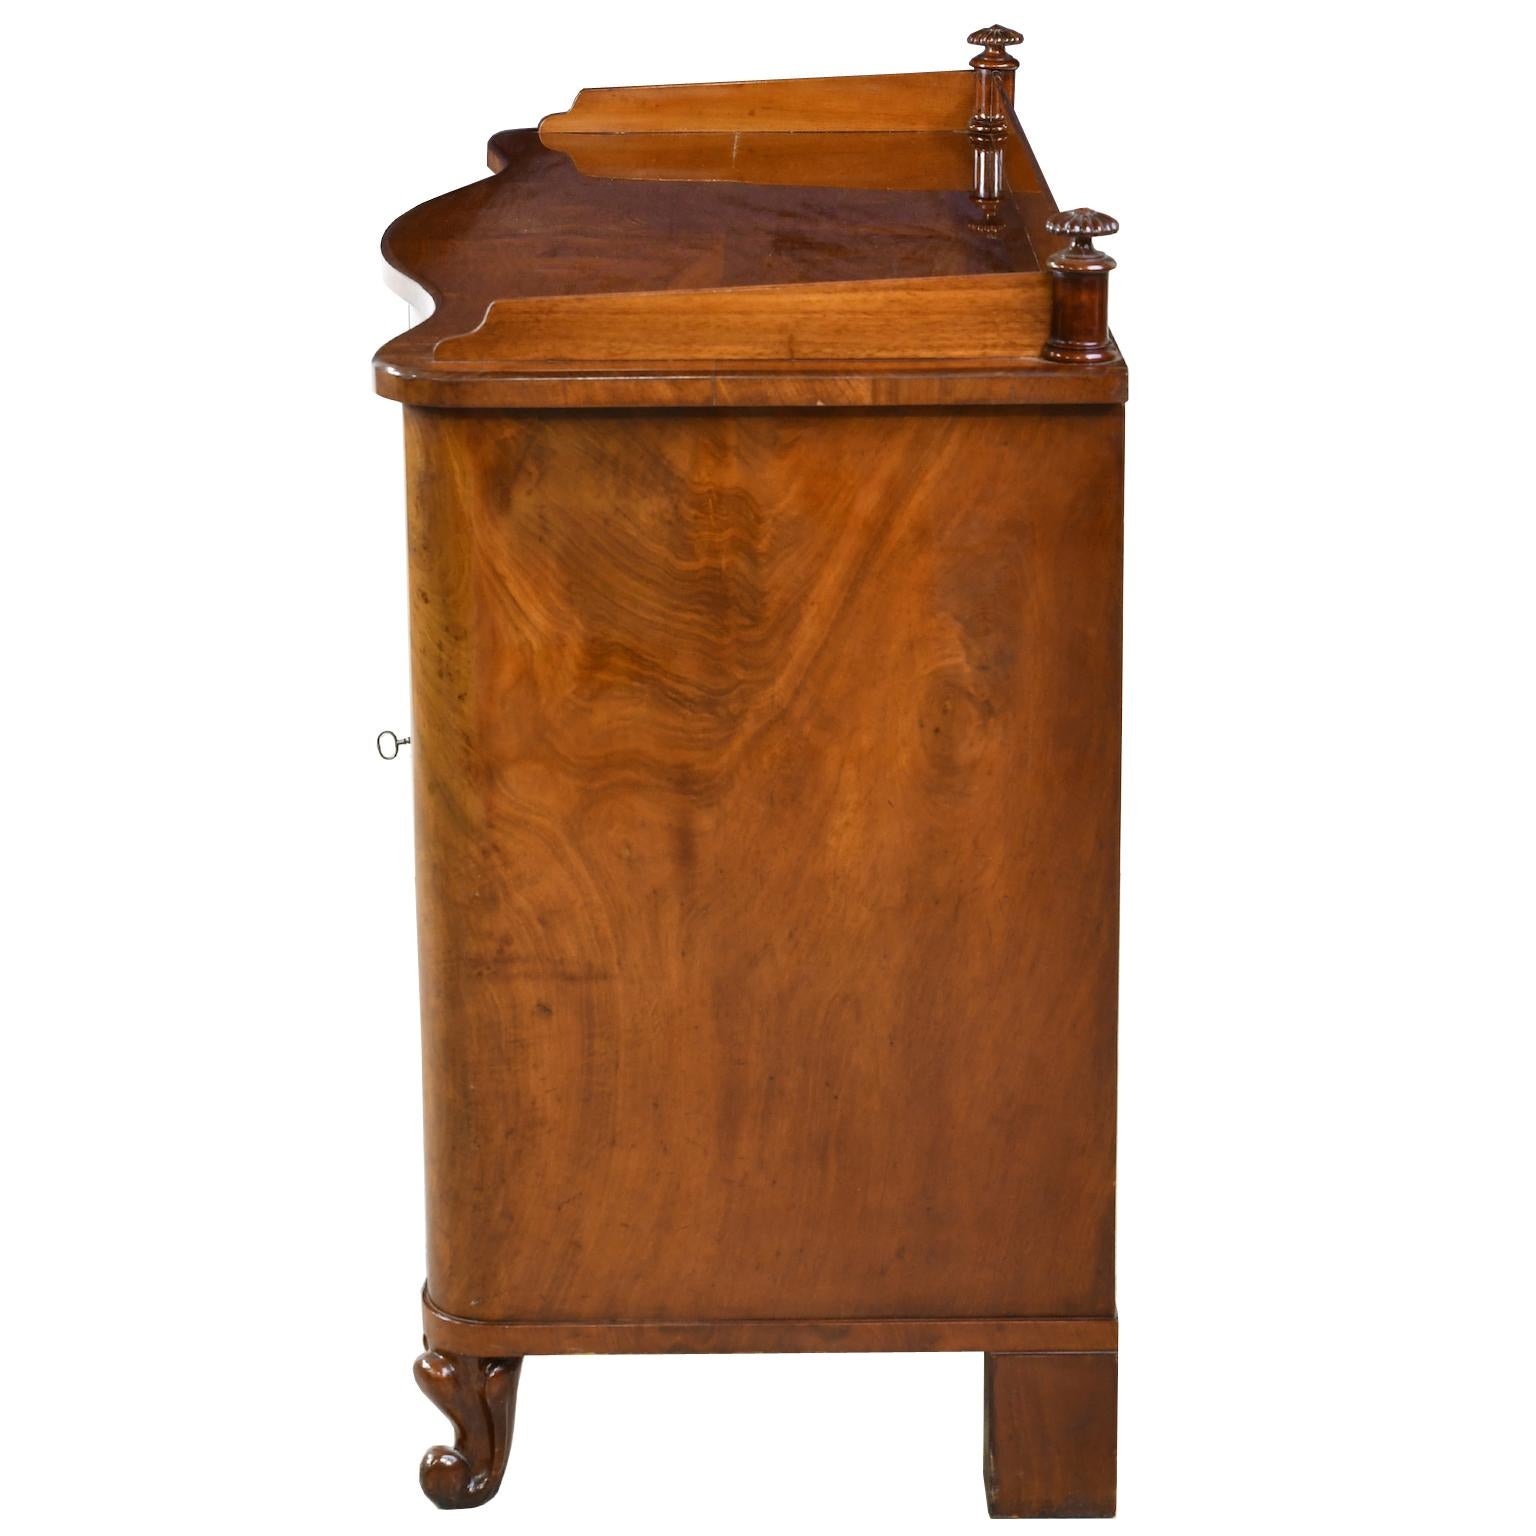 Danish Christian VIII Serpentine-Front Sideboard in West Indies Mahogany, circa 1850 For Sale